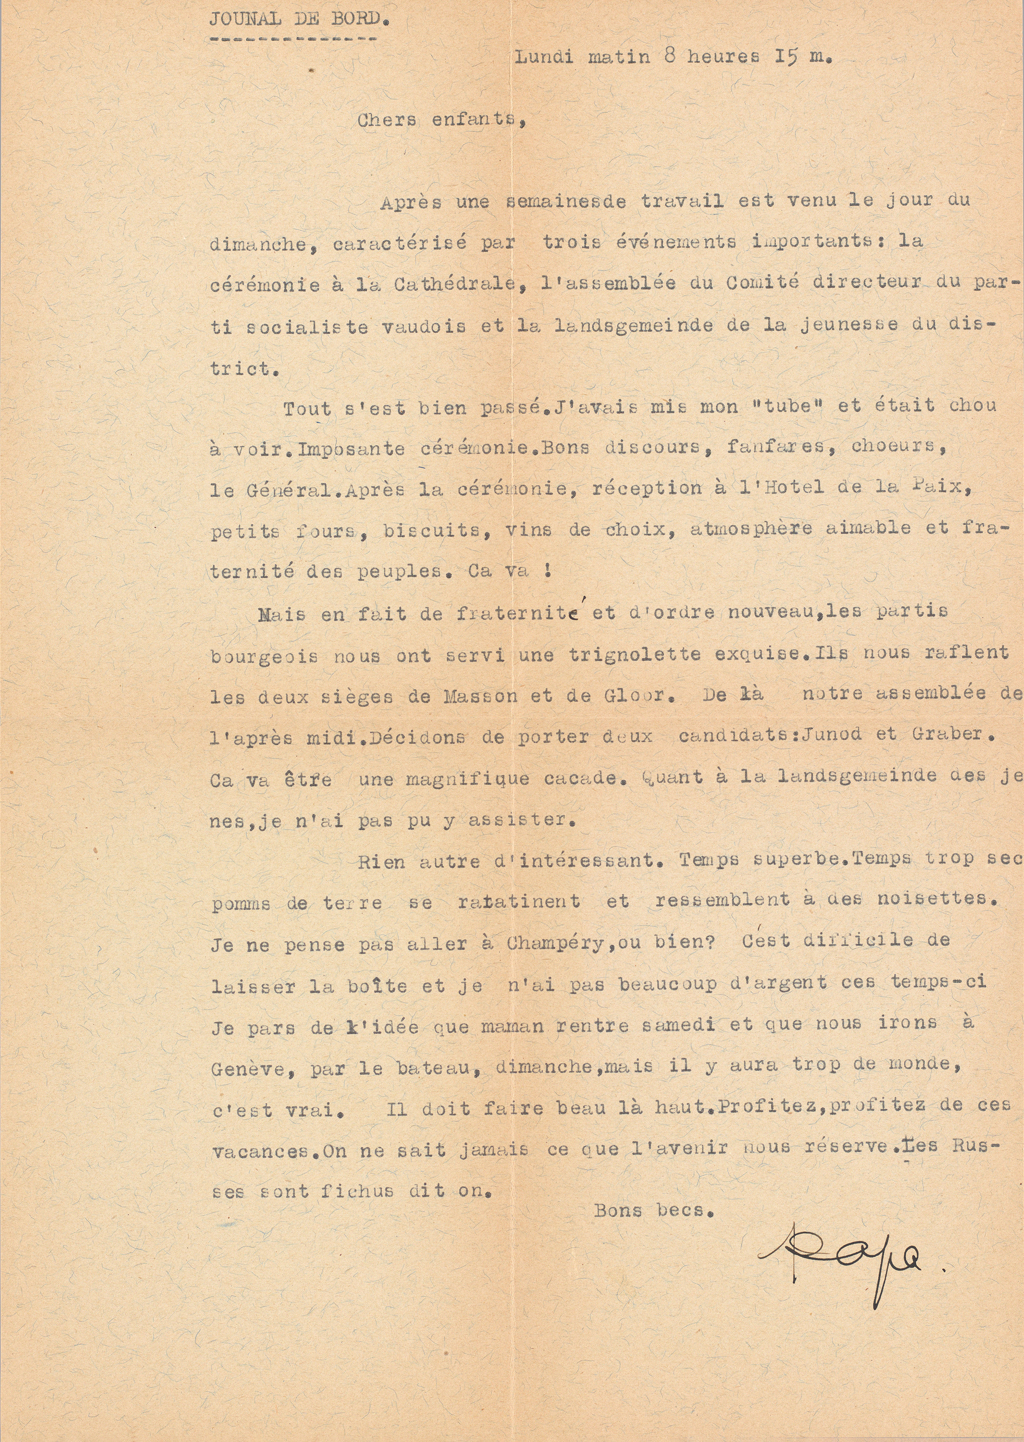 Typed letter by Paul Golay on yellowed paper